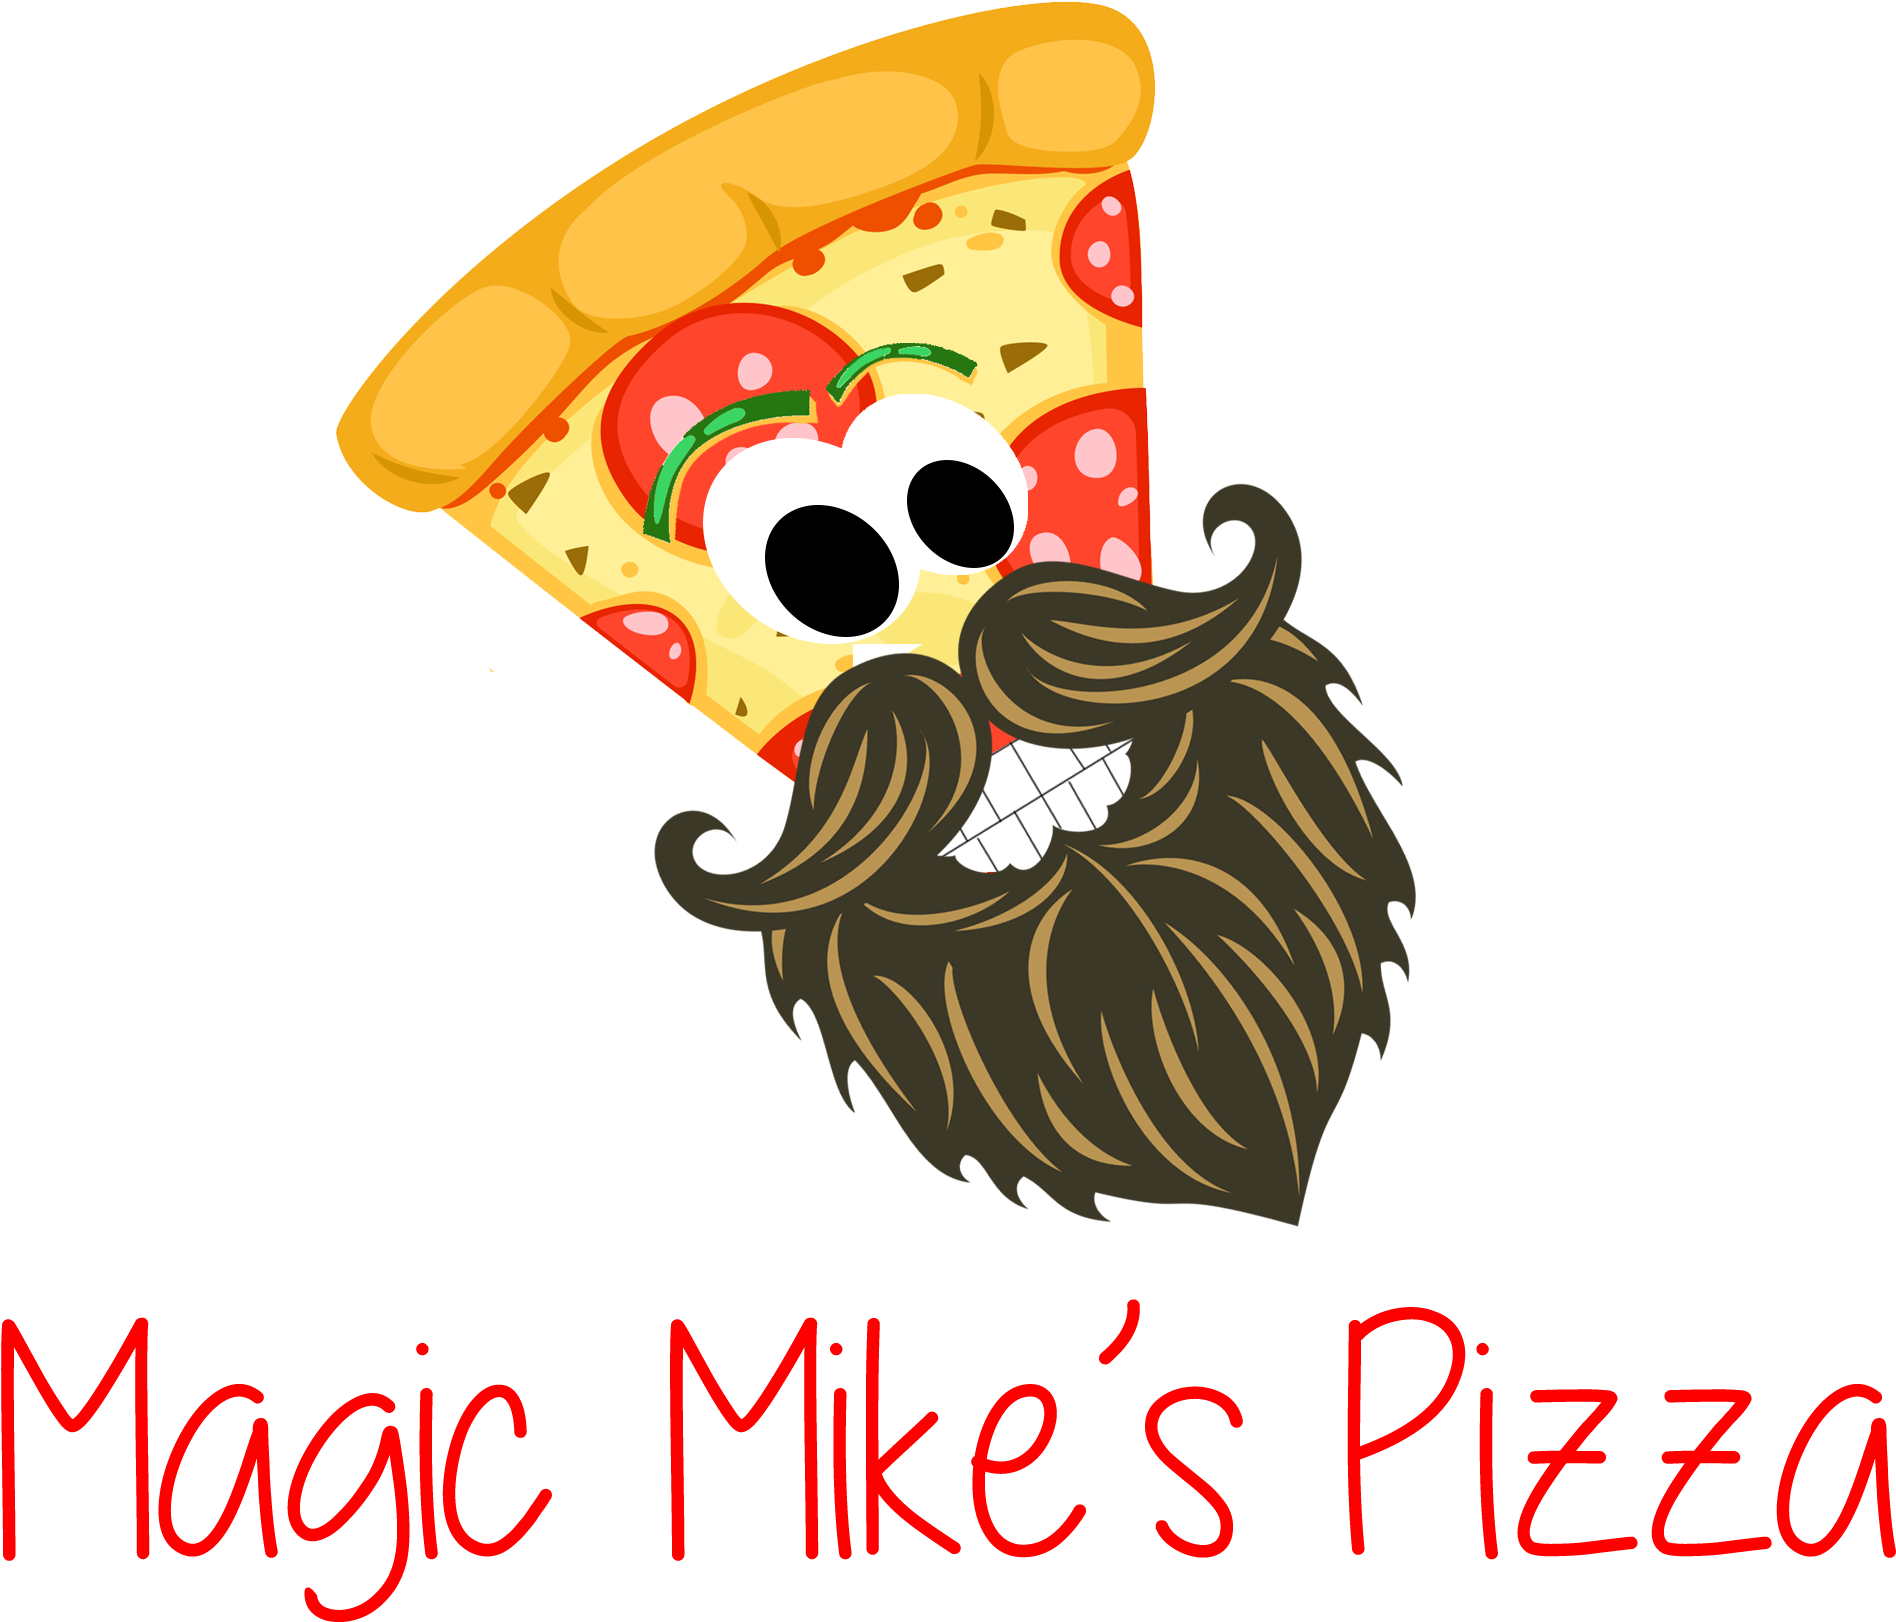 Front Page Sidebar - Magic Mike's Pizza (2011x1740)